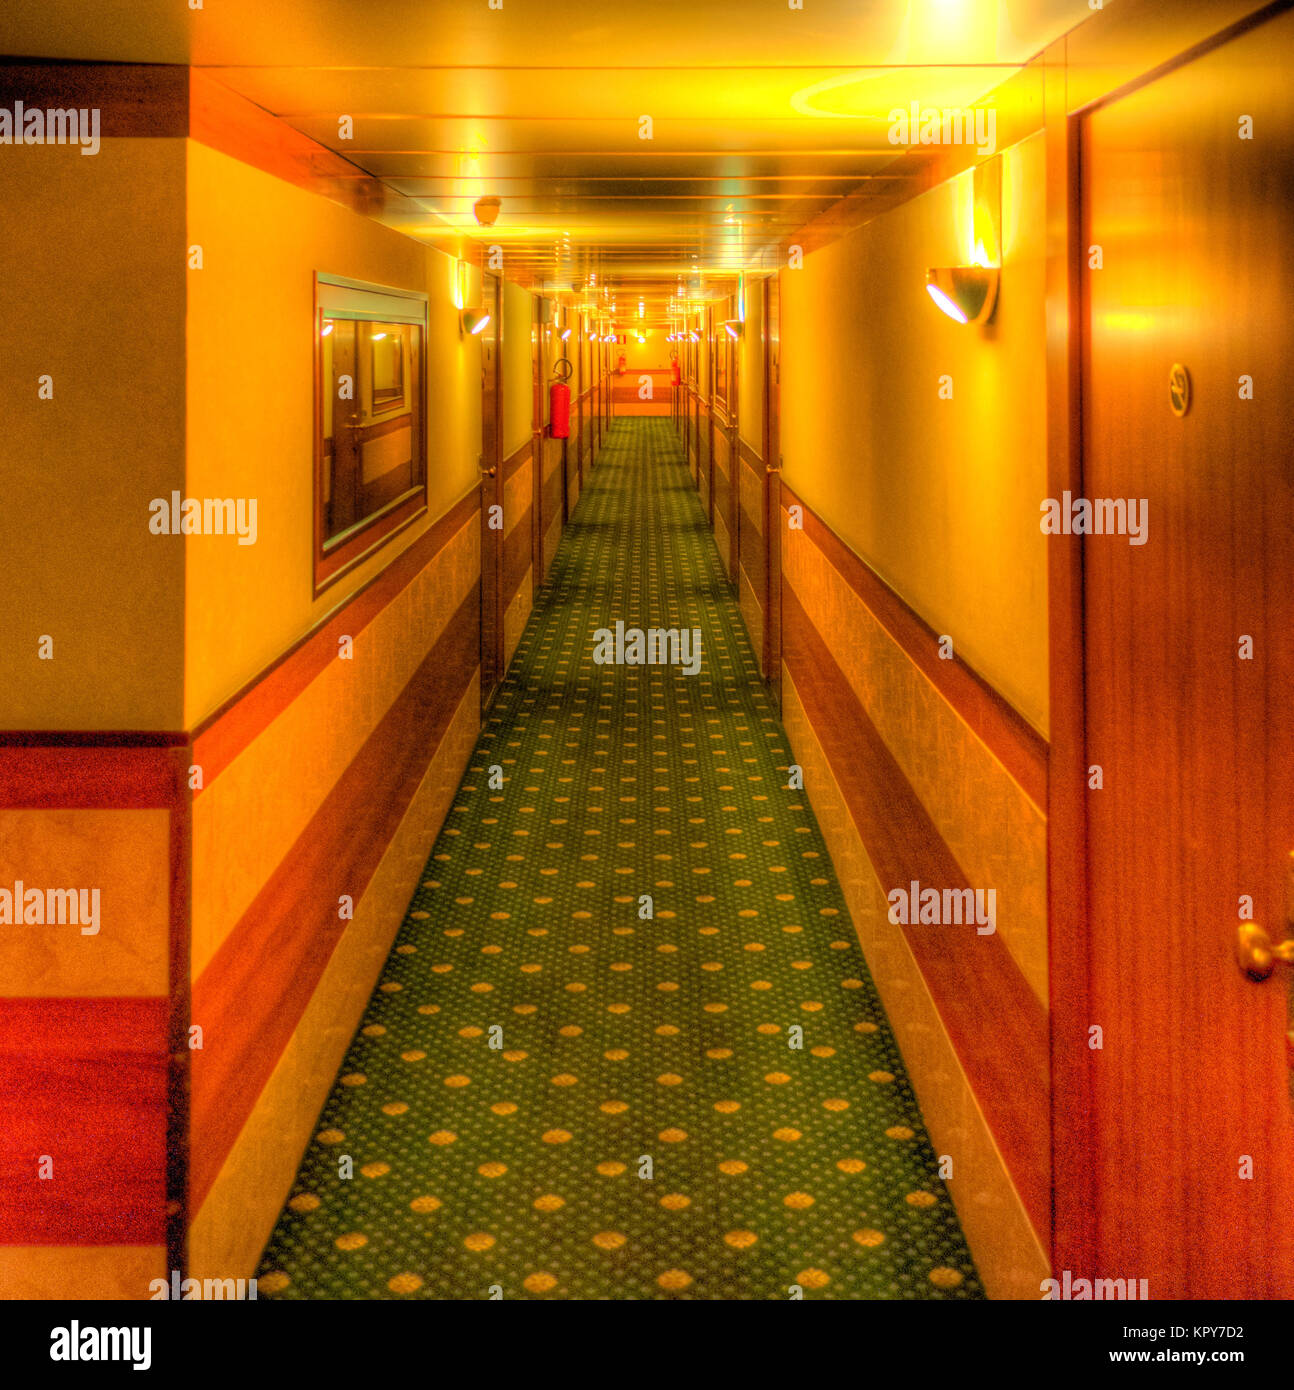 The Shining Movie Hotel High Resolution Stock Photography and Images - Alamy